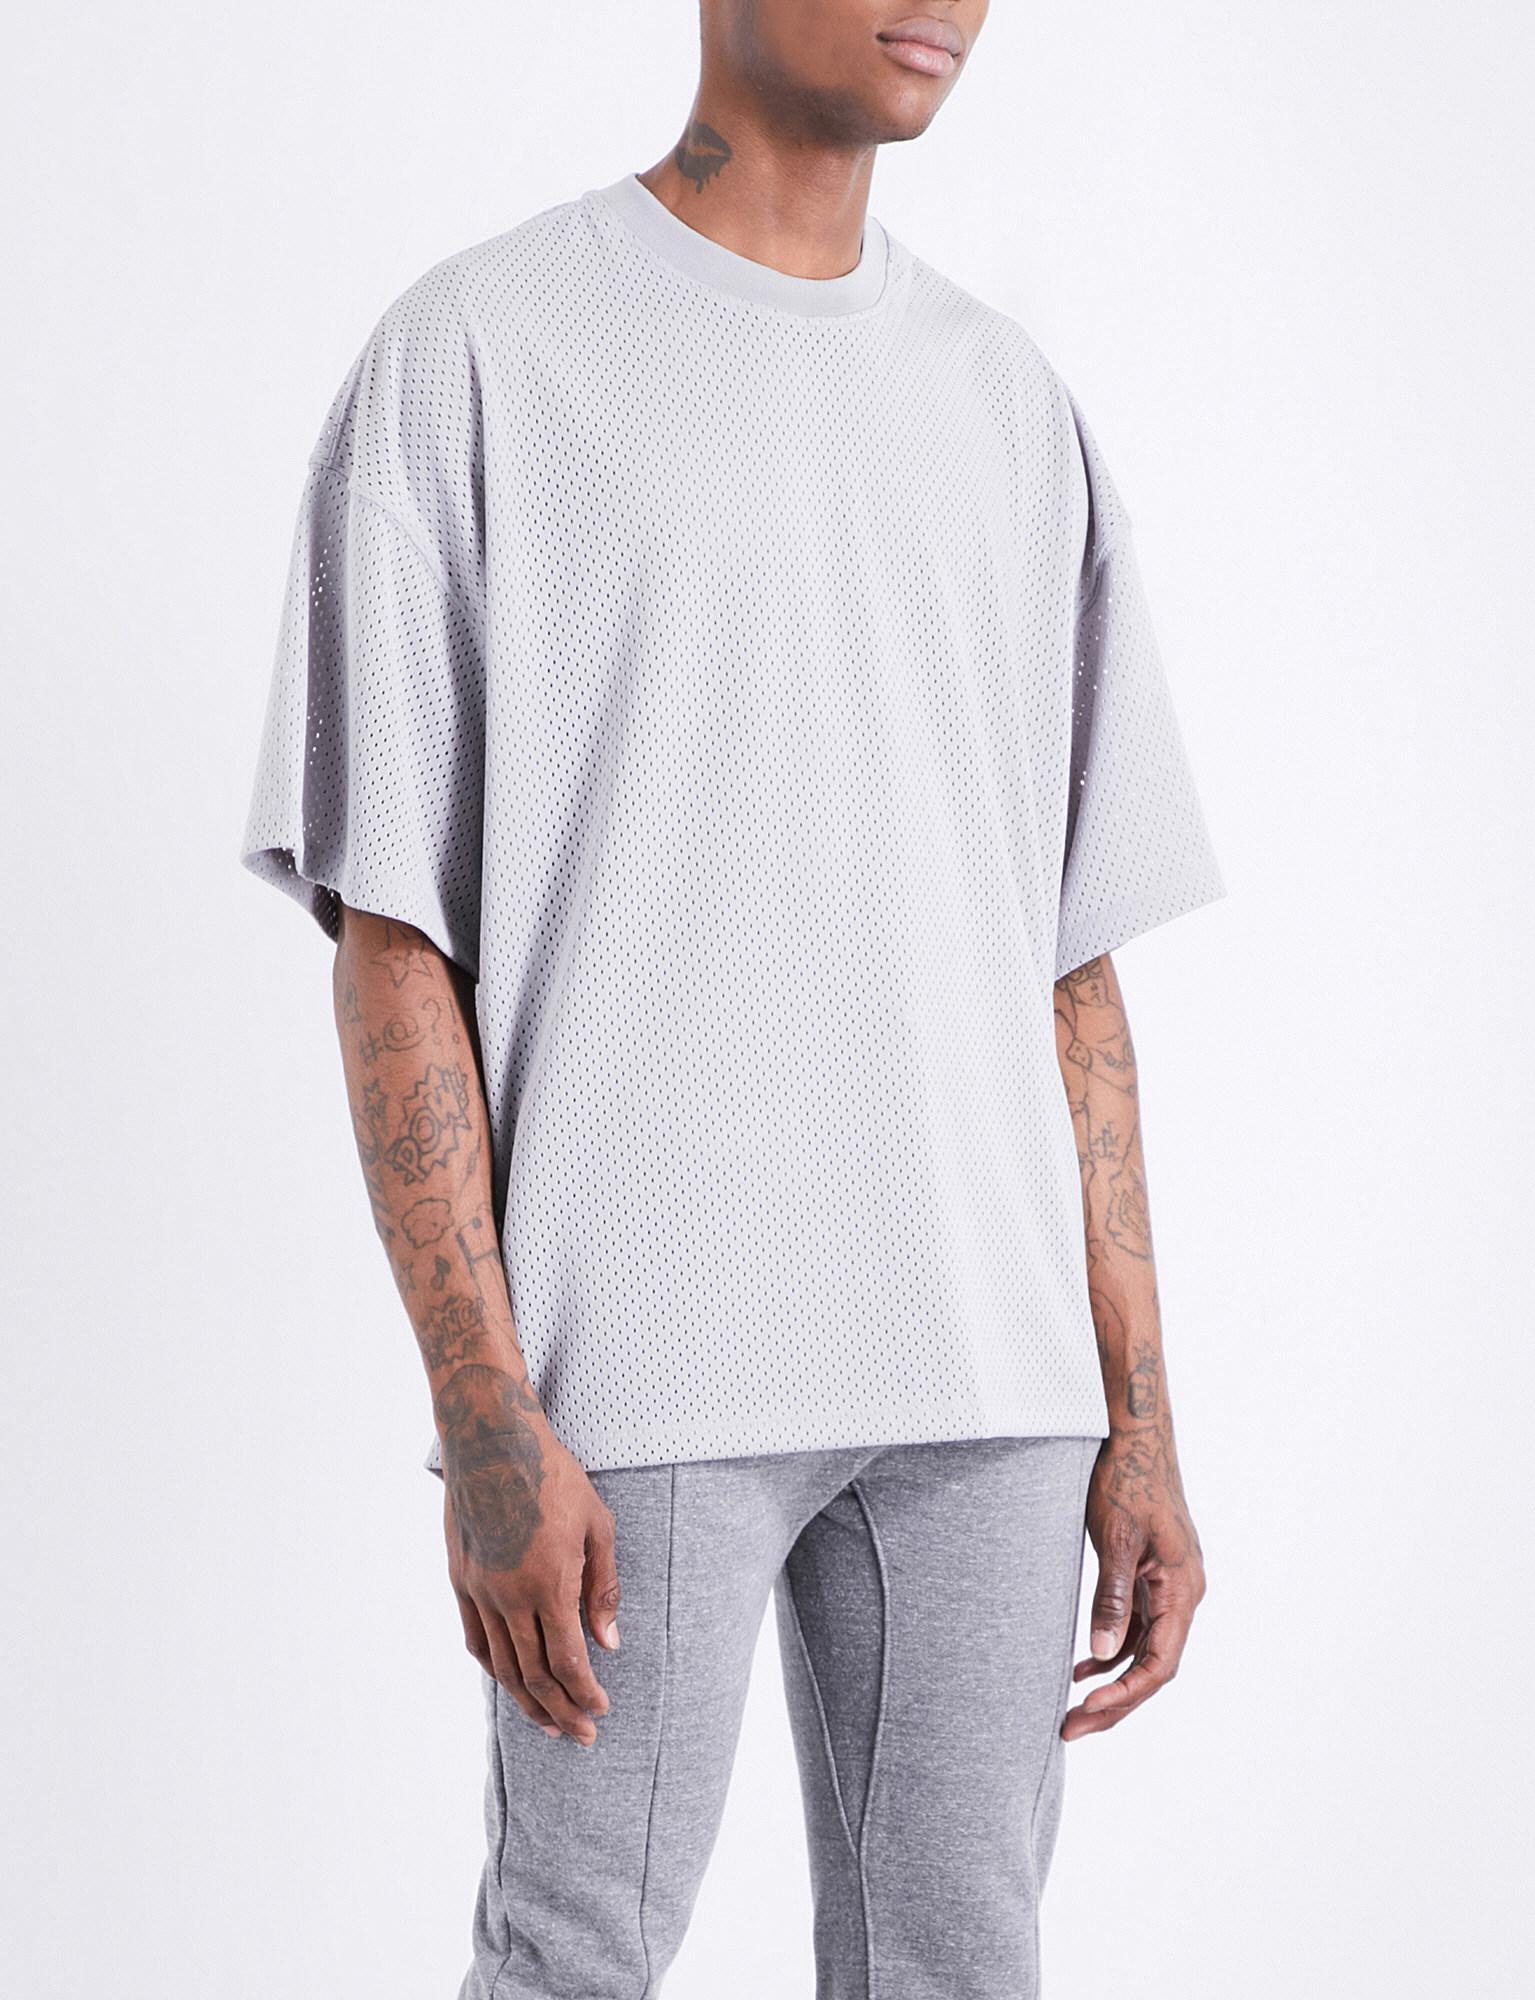 Fear Of God Fifth Collection Batting Practice Mesh Top in Grey 